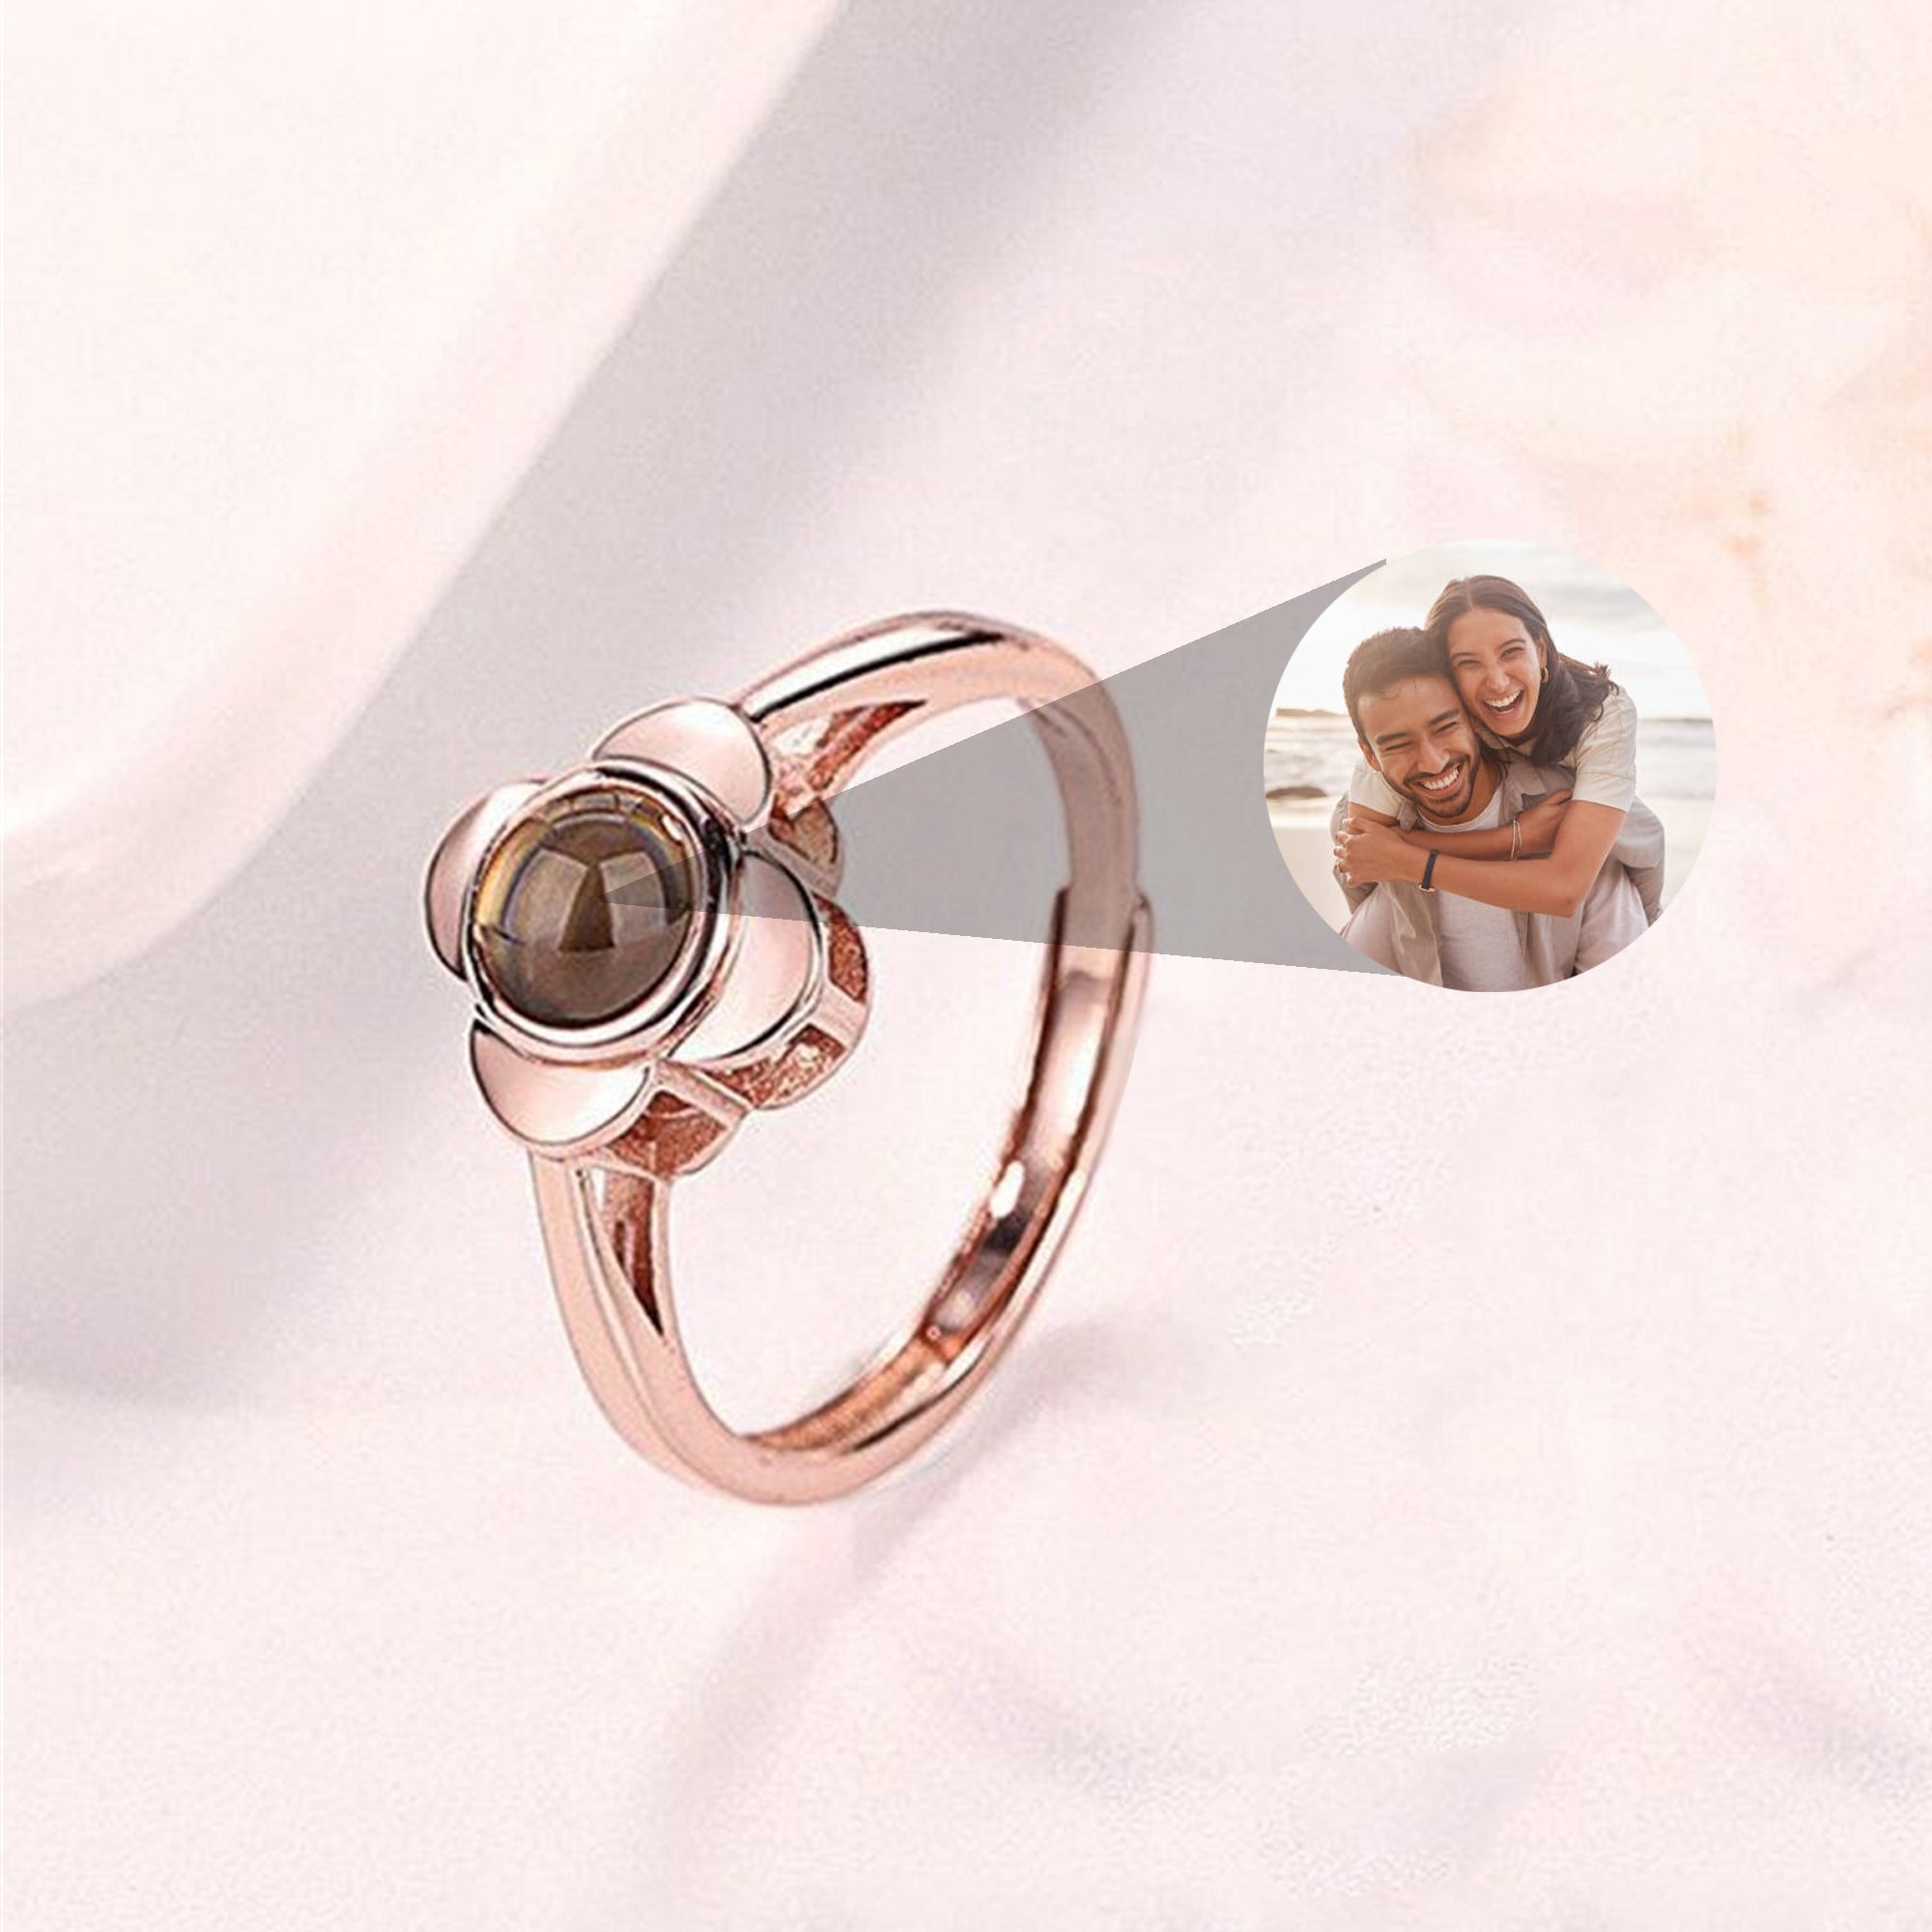 Personalized Colorful Photo Projection Ring Adjustable Ring